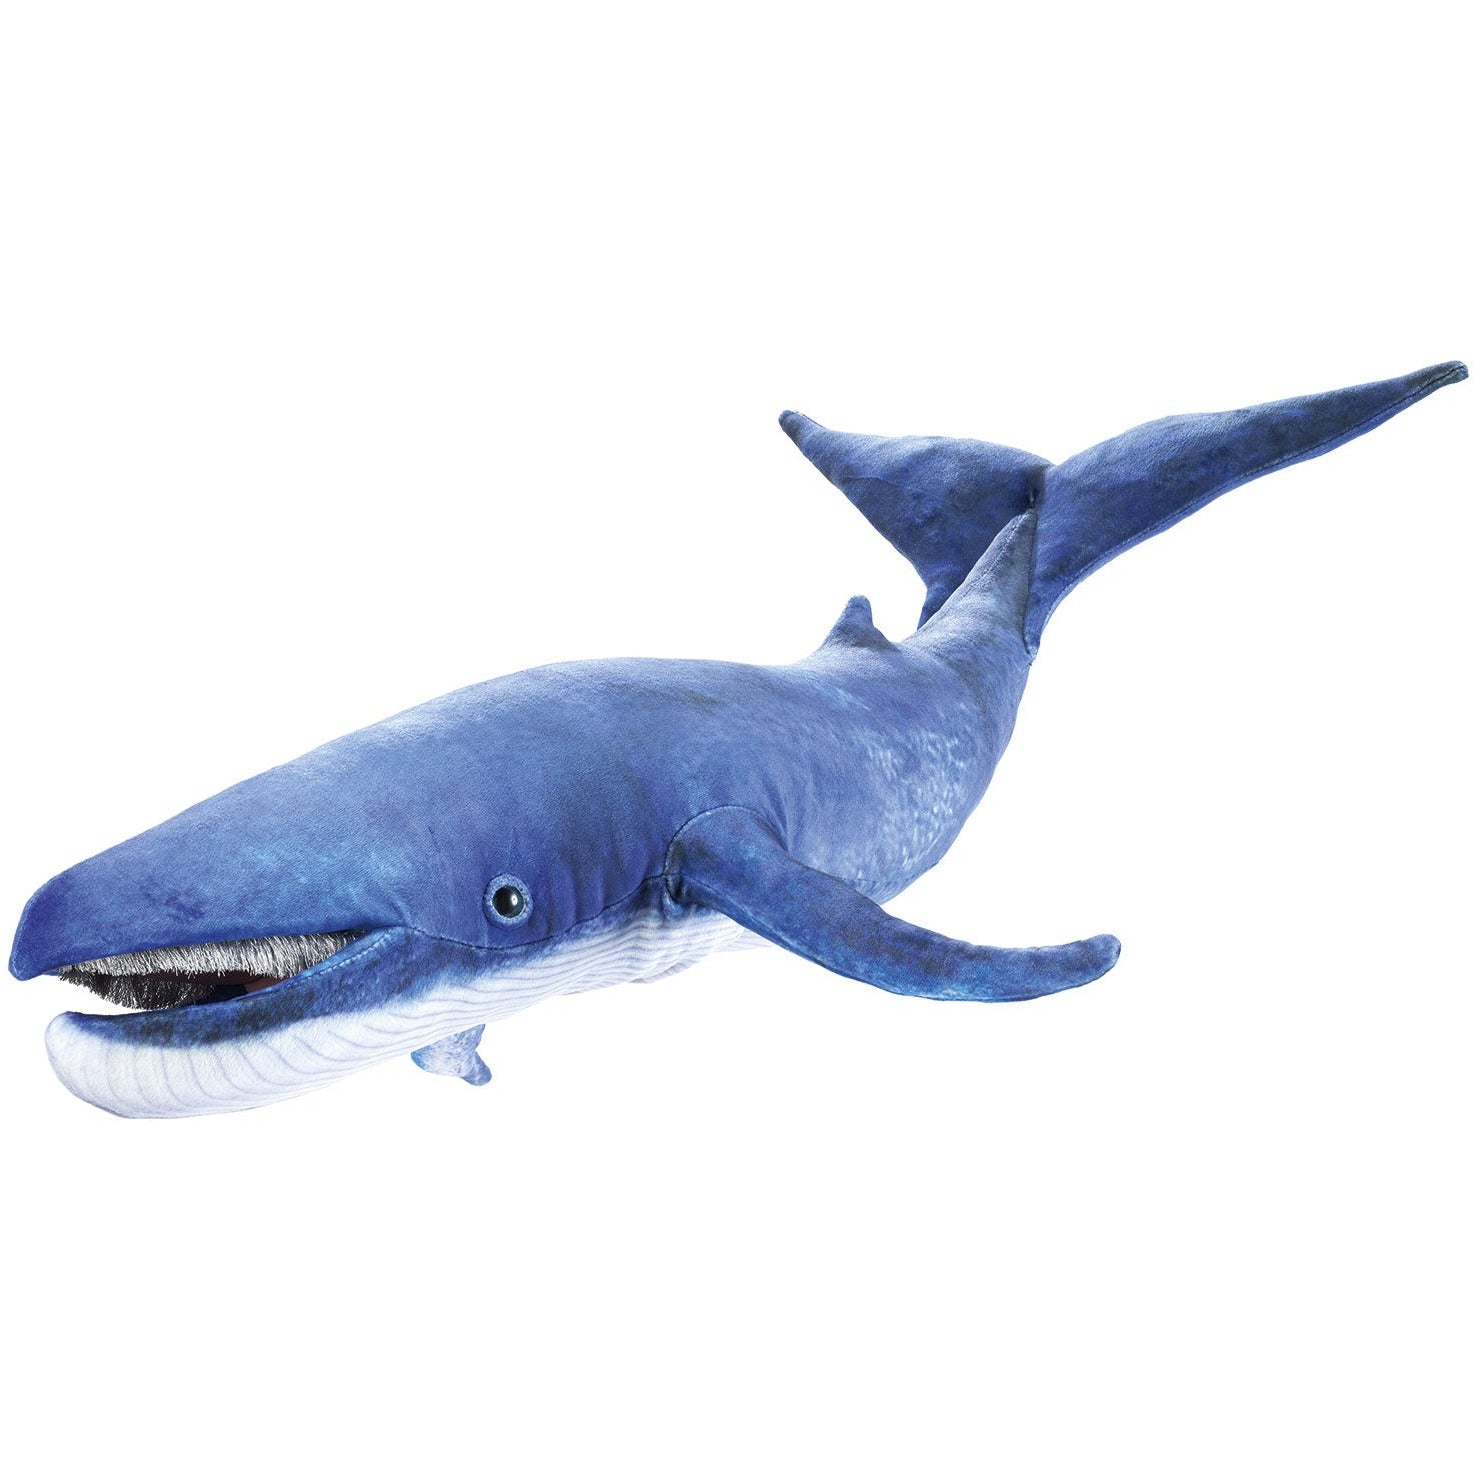 Folkmanis Puppets | Blauwal / Blue whale